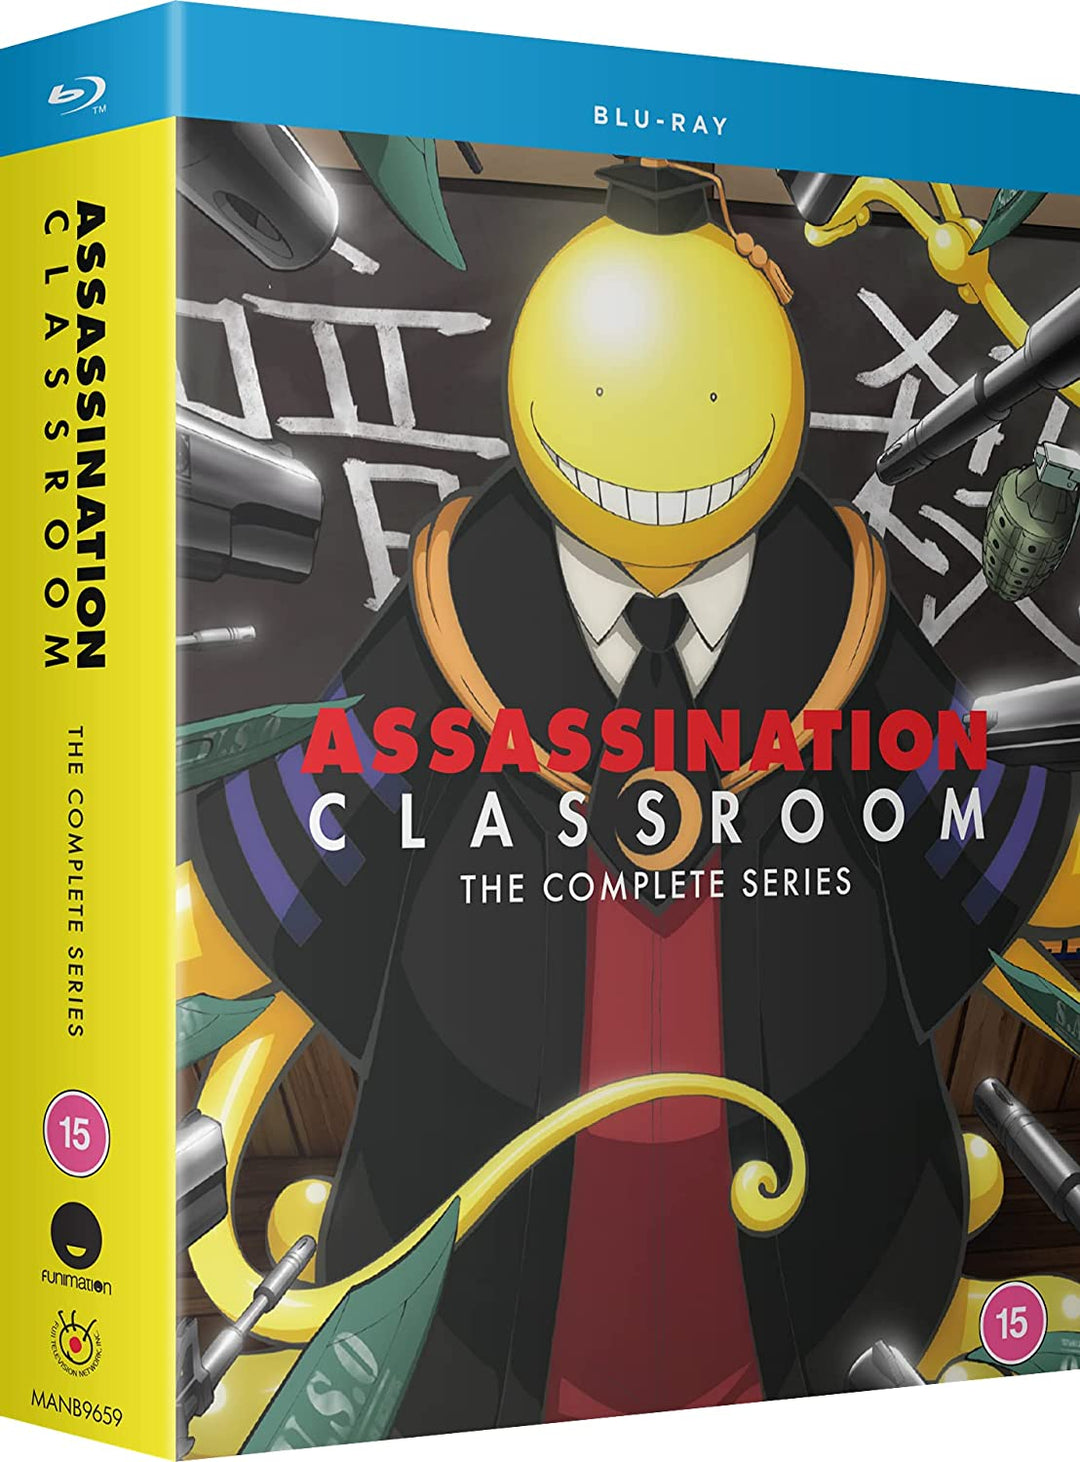 Assassination Classroom: The Complete Series [Blu-ray]